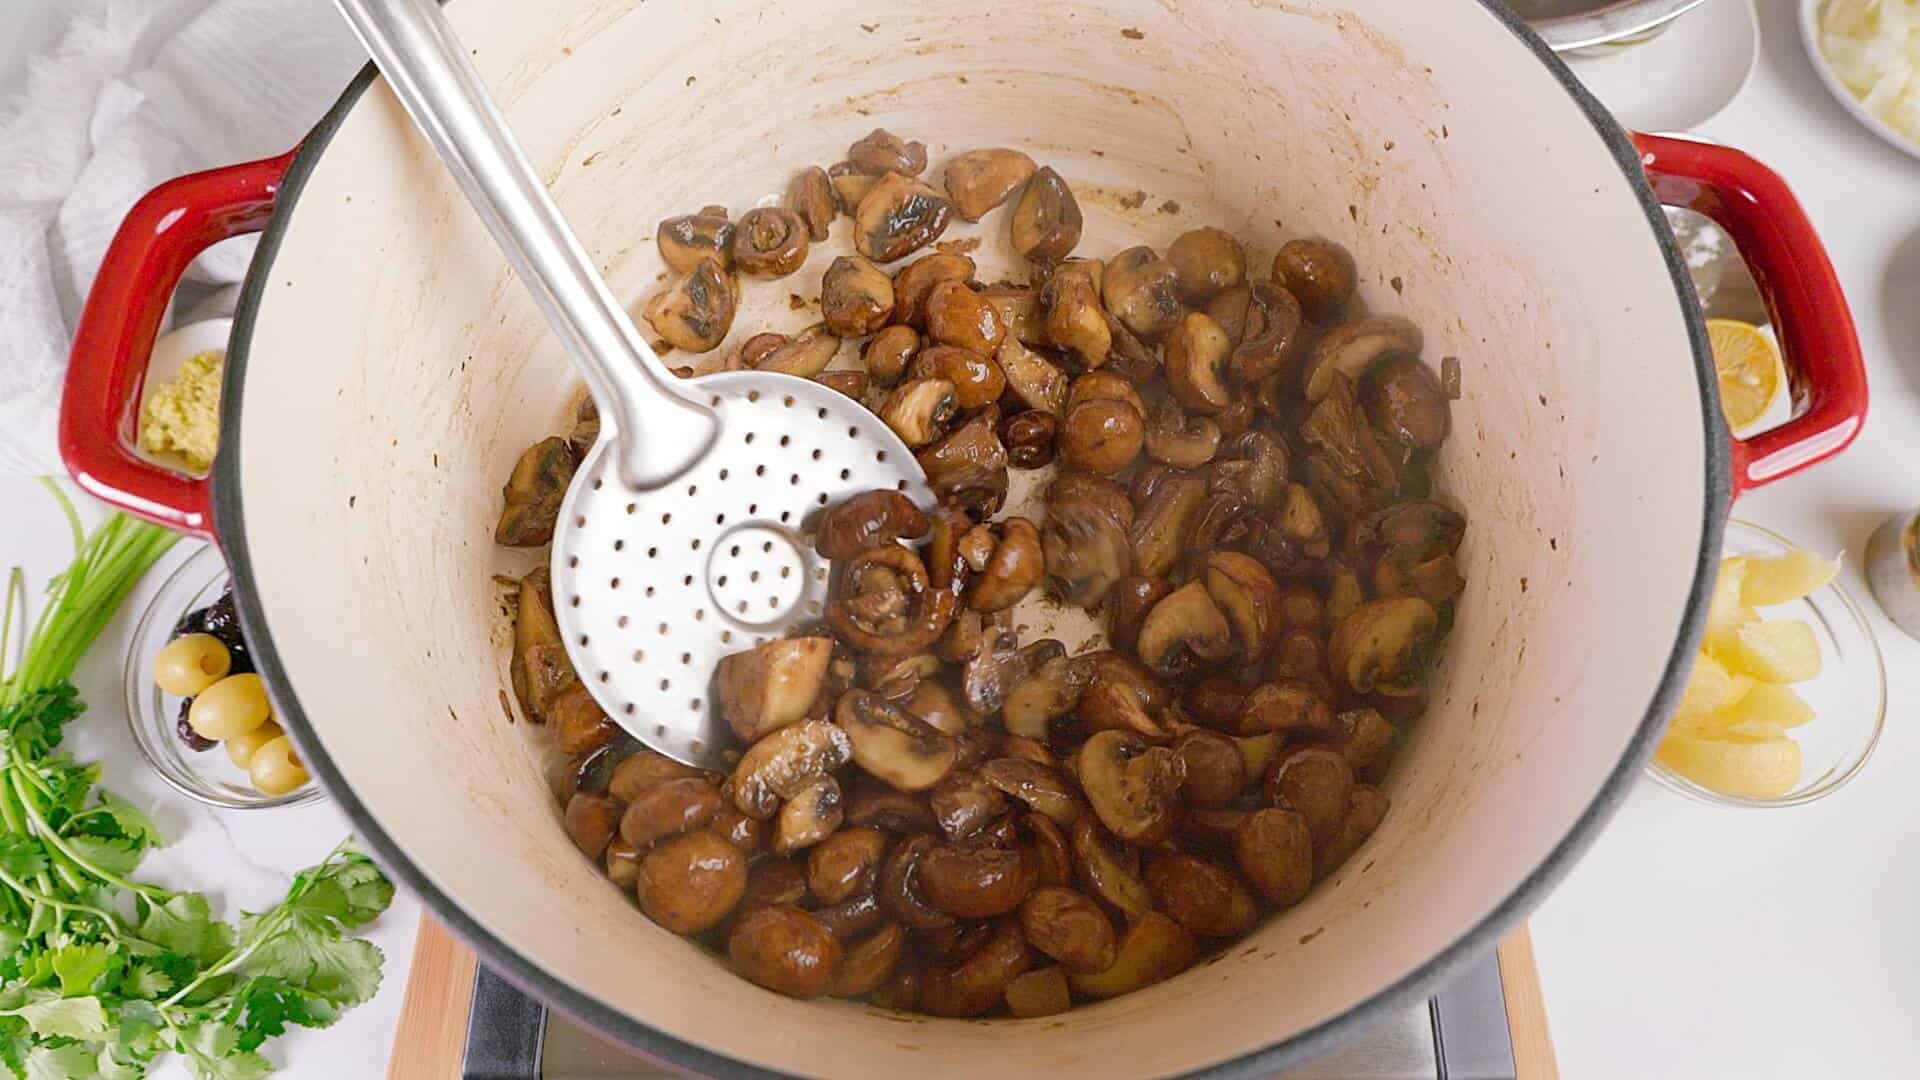 Sauteing mushrooms for the stew.